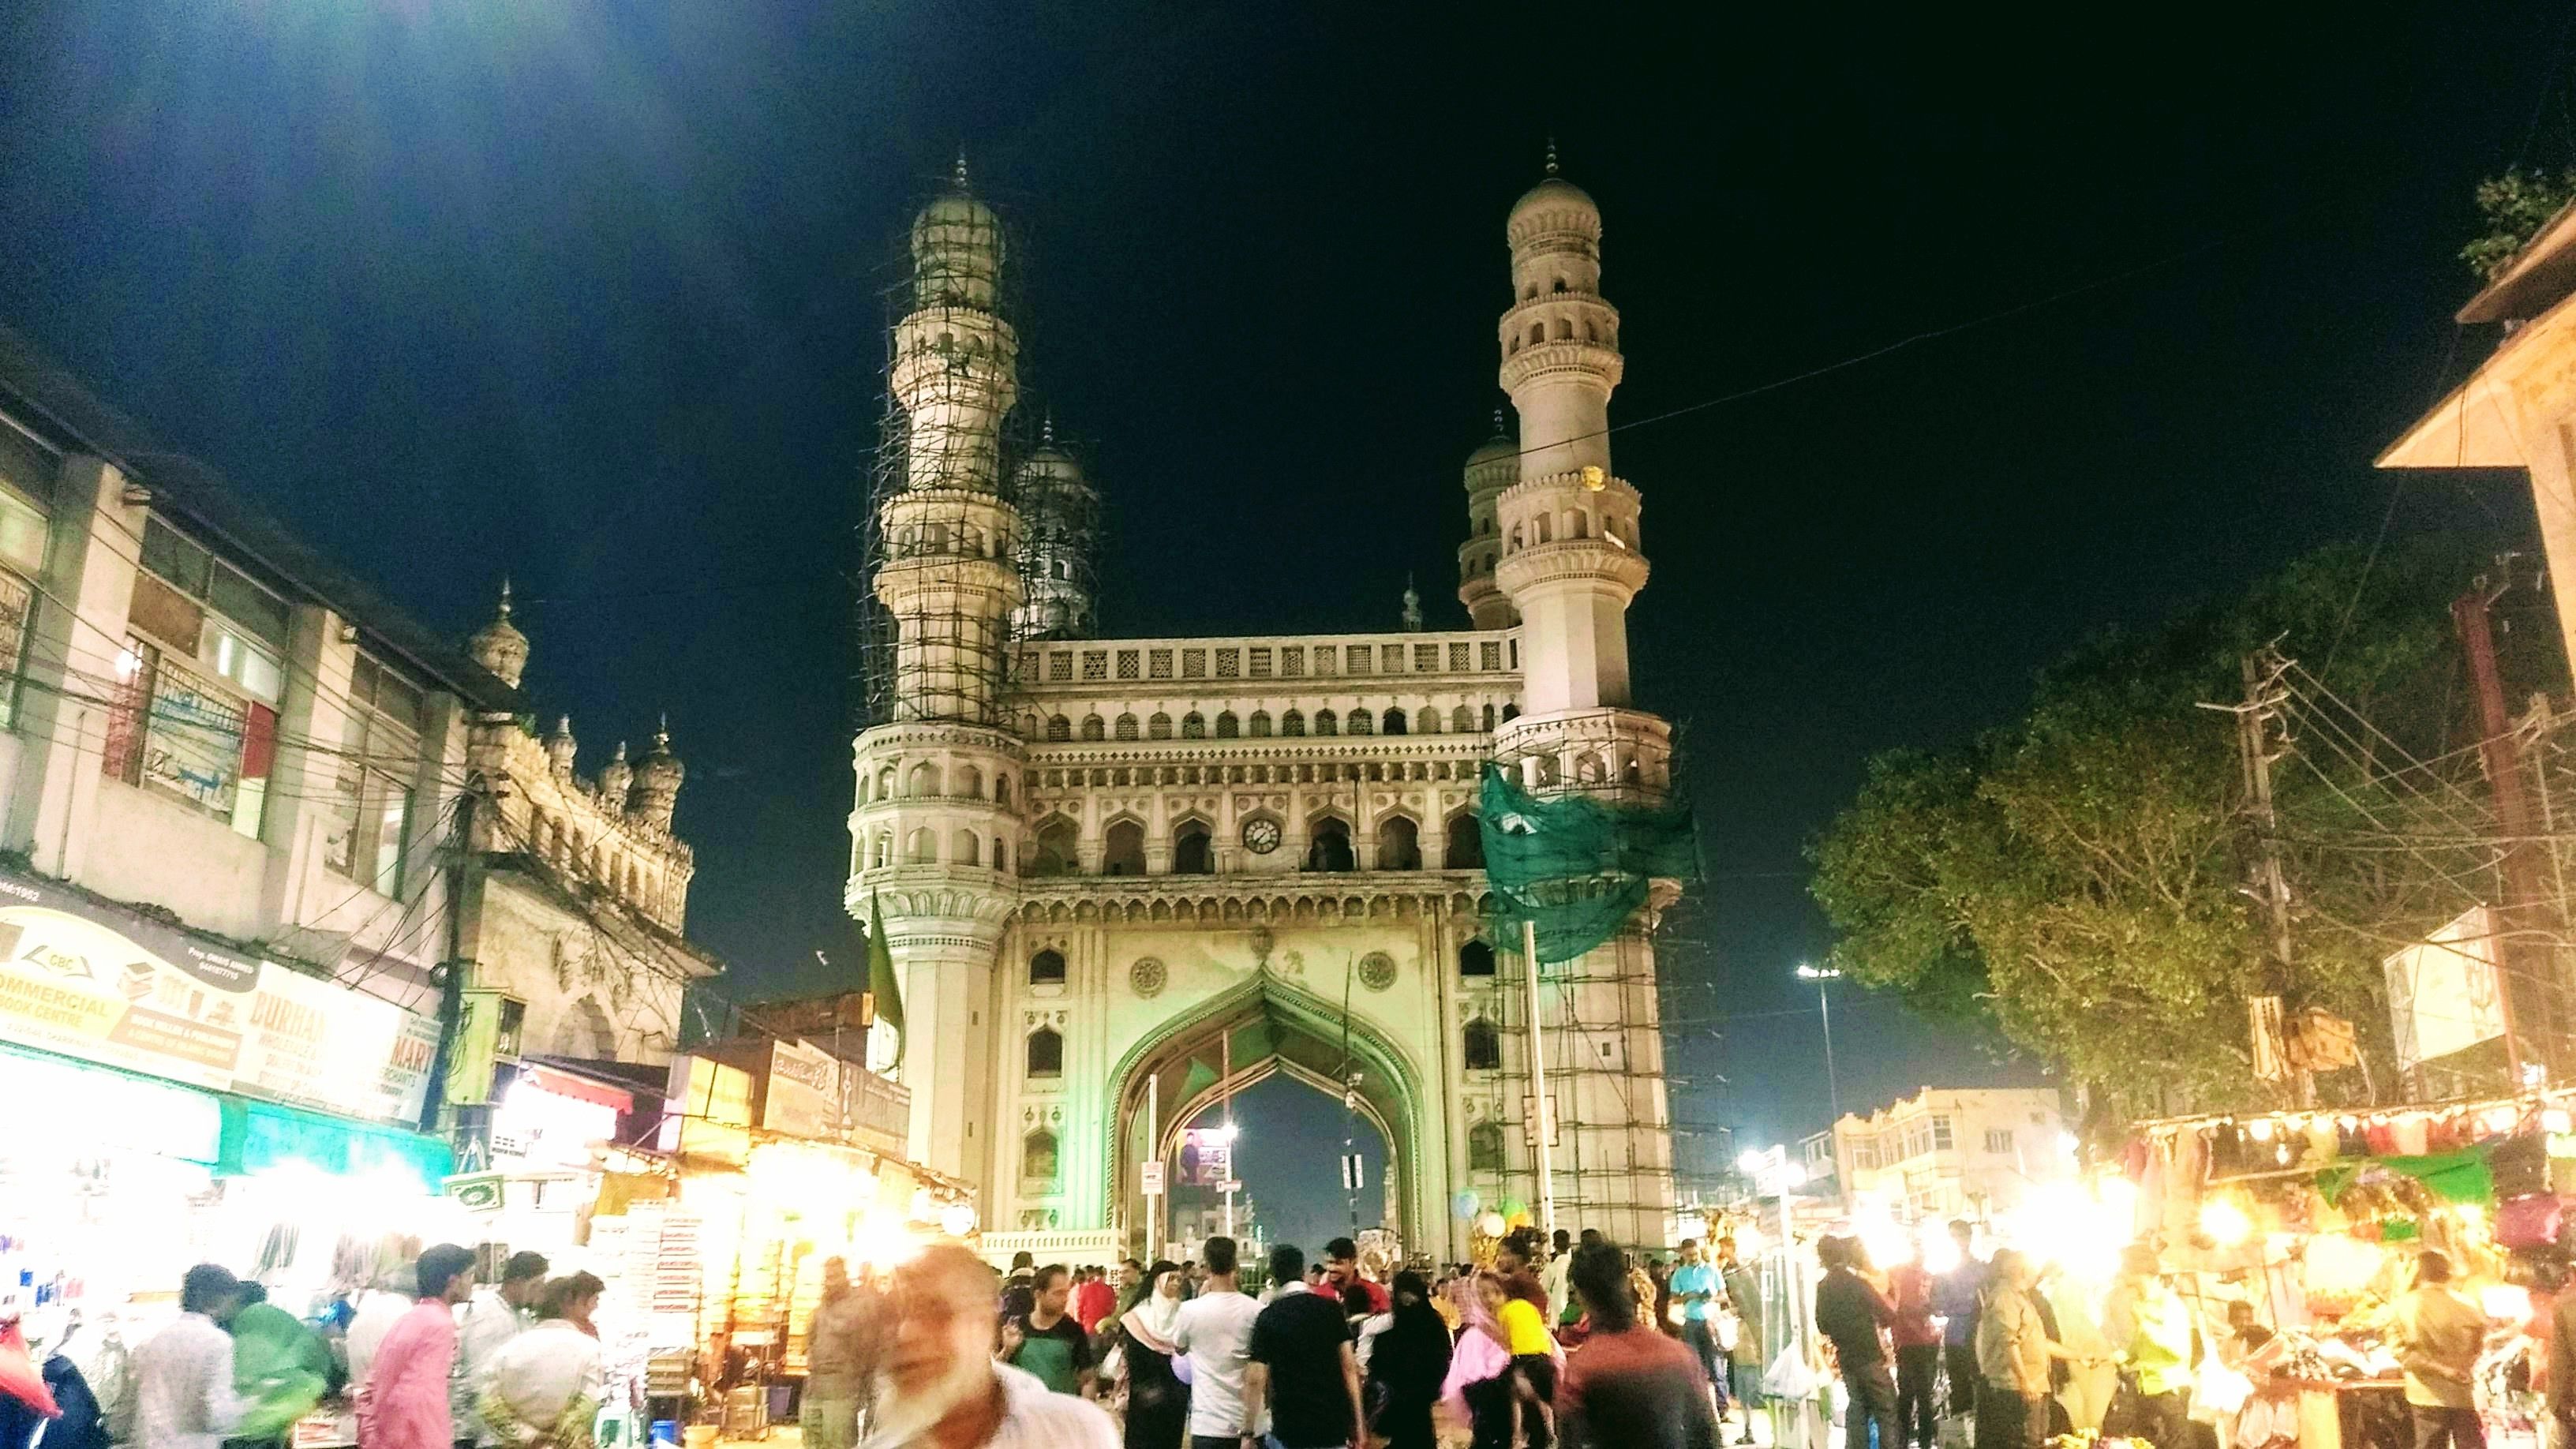 Charminar - the global icon of the city